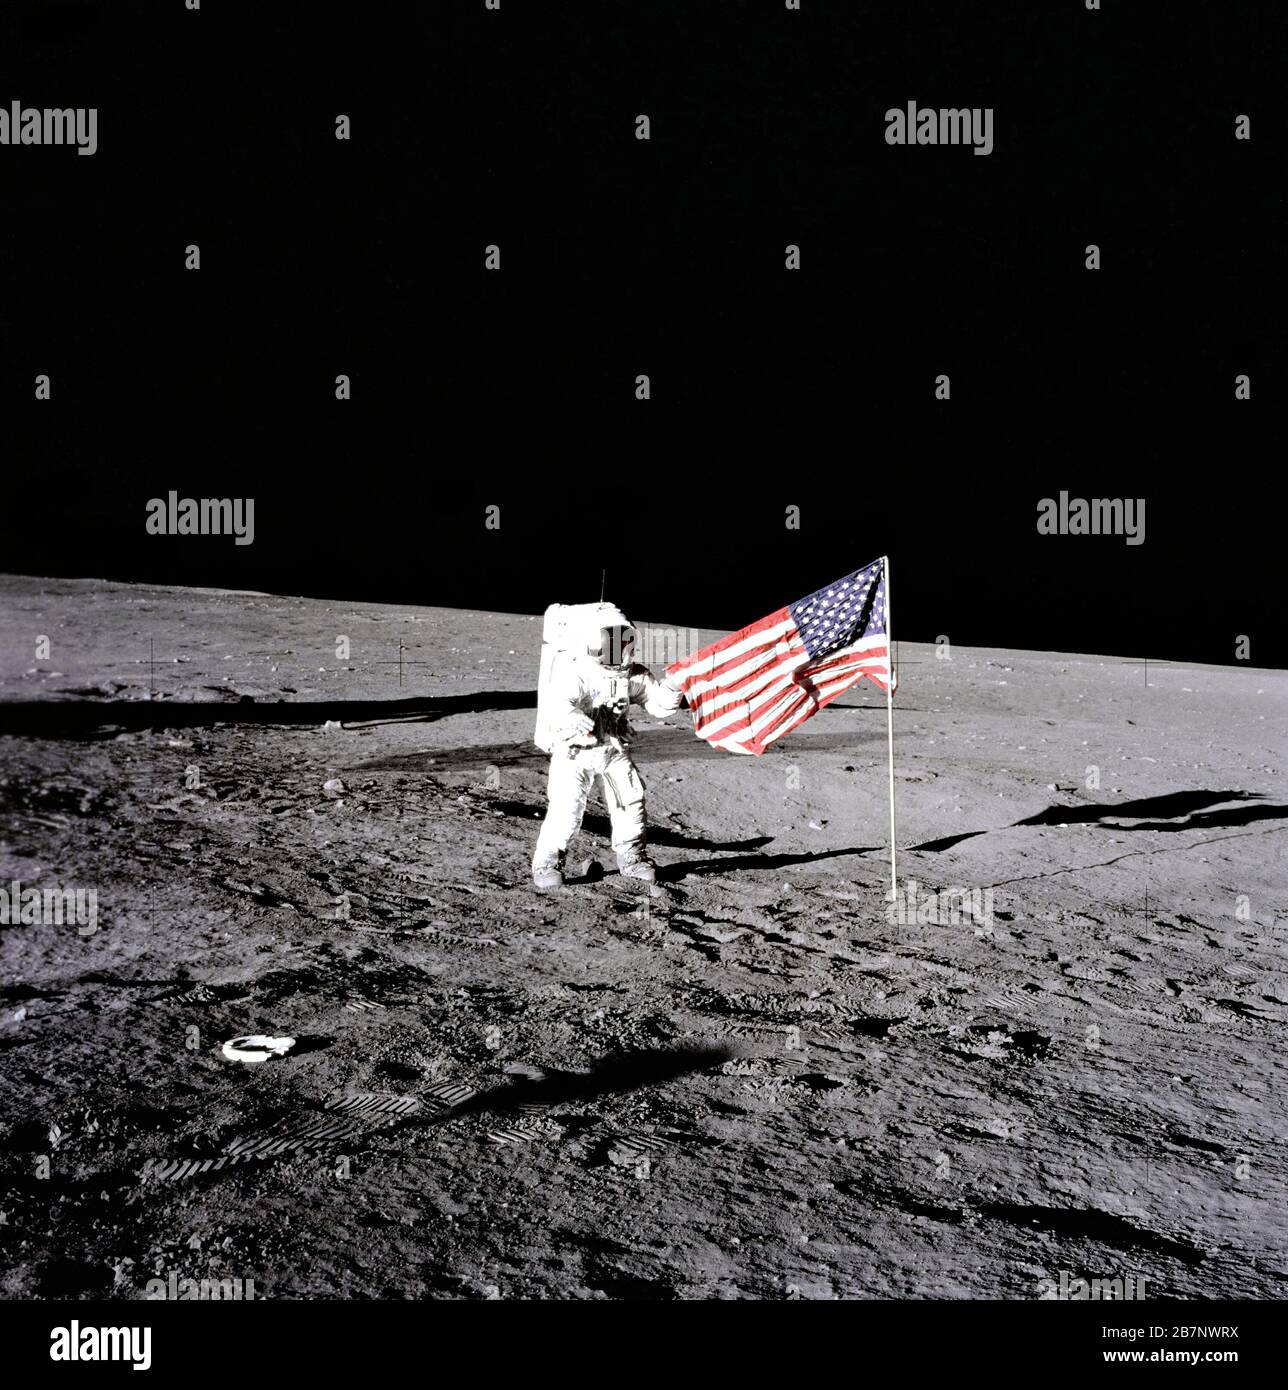 Apollo 12 - NASA, 1969. During the first extravehicular activity, astronaut Charles Conrad, Jr., Apollo 12 commander, releases the United States flag on the lunar surface. Boot prints from the astronauts can be seen in the image as well, November 19, 1969. Stock Photo